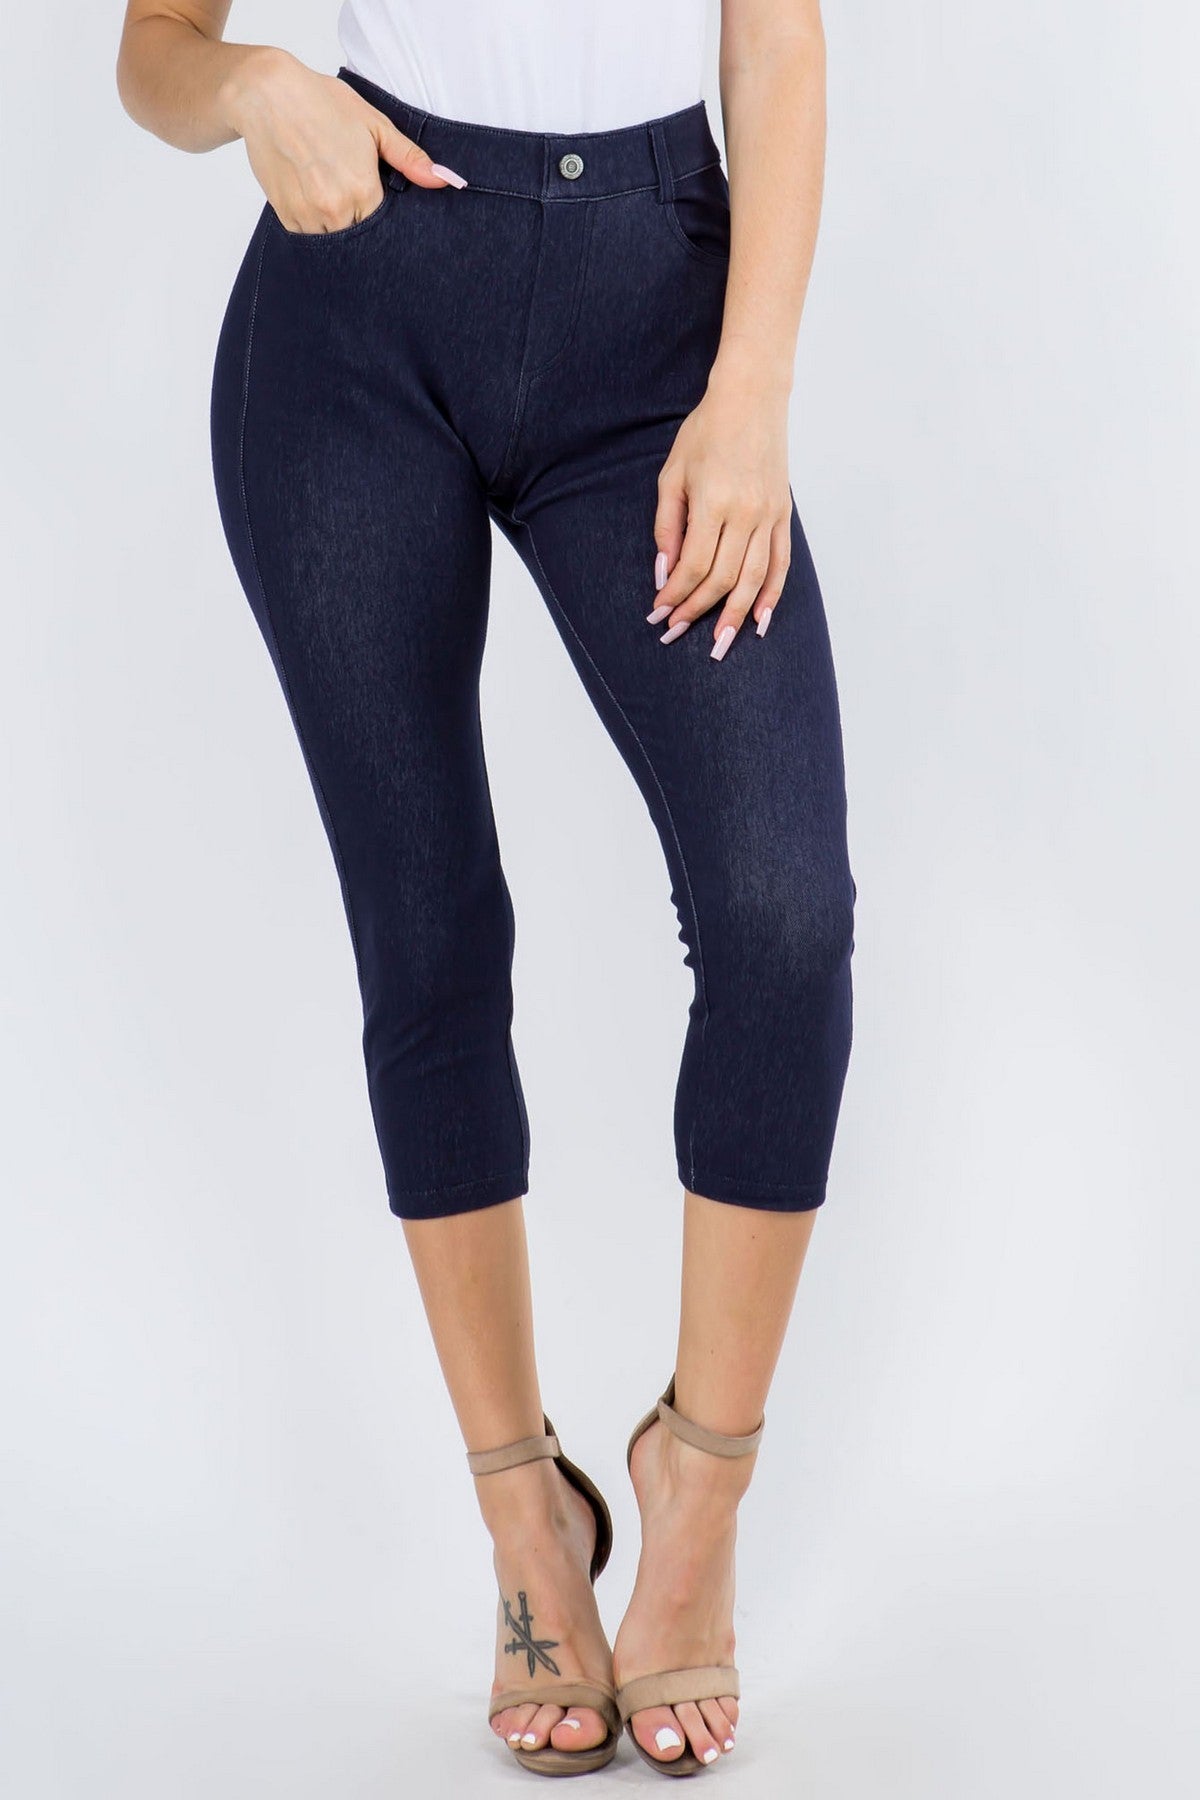 Woman wearing navy jegging capris with pockets